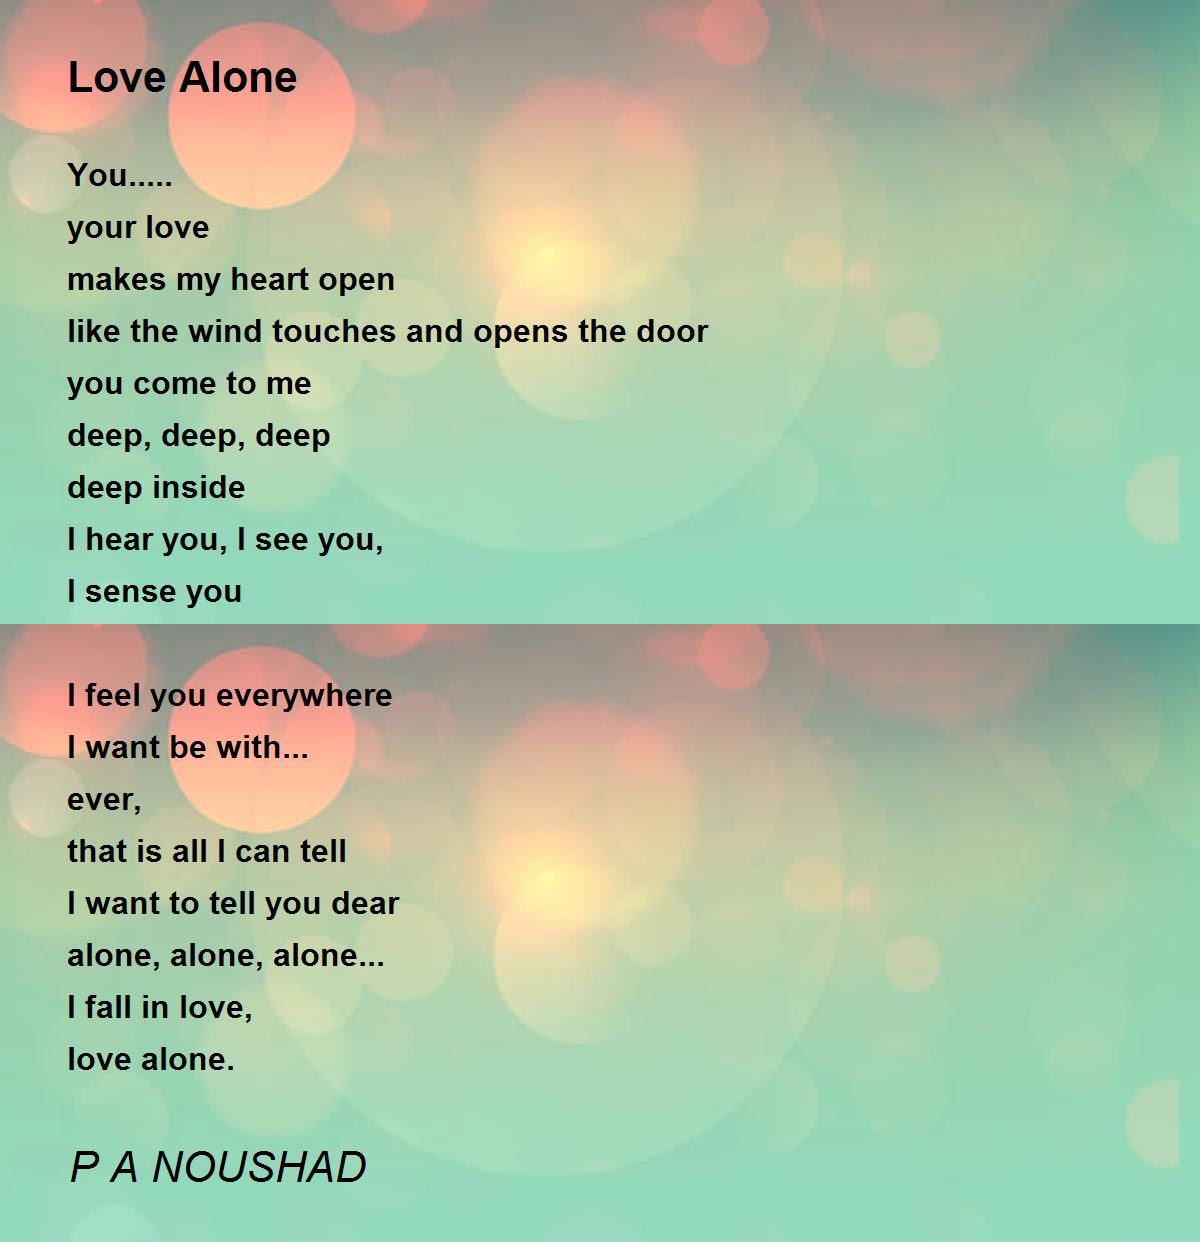 Love Alone - Love Alone Poem by P A NOUSHAD (SHOMSI)